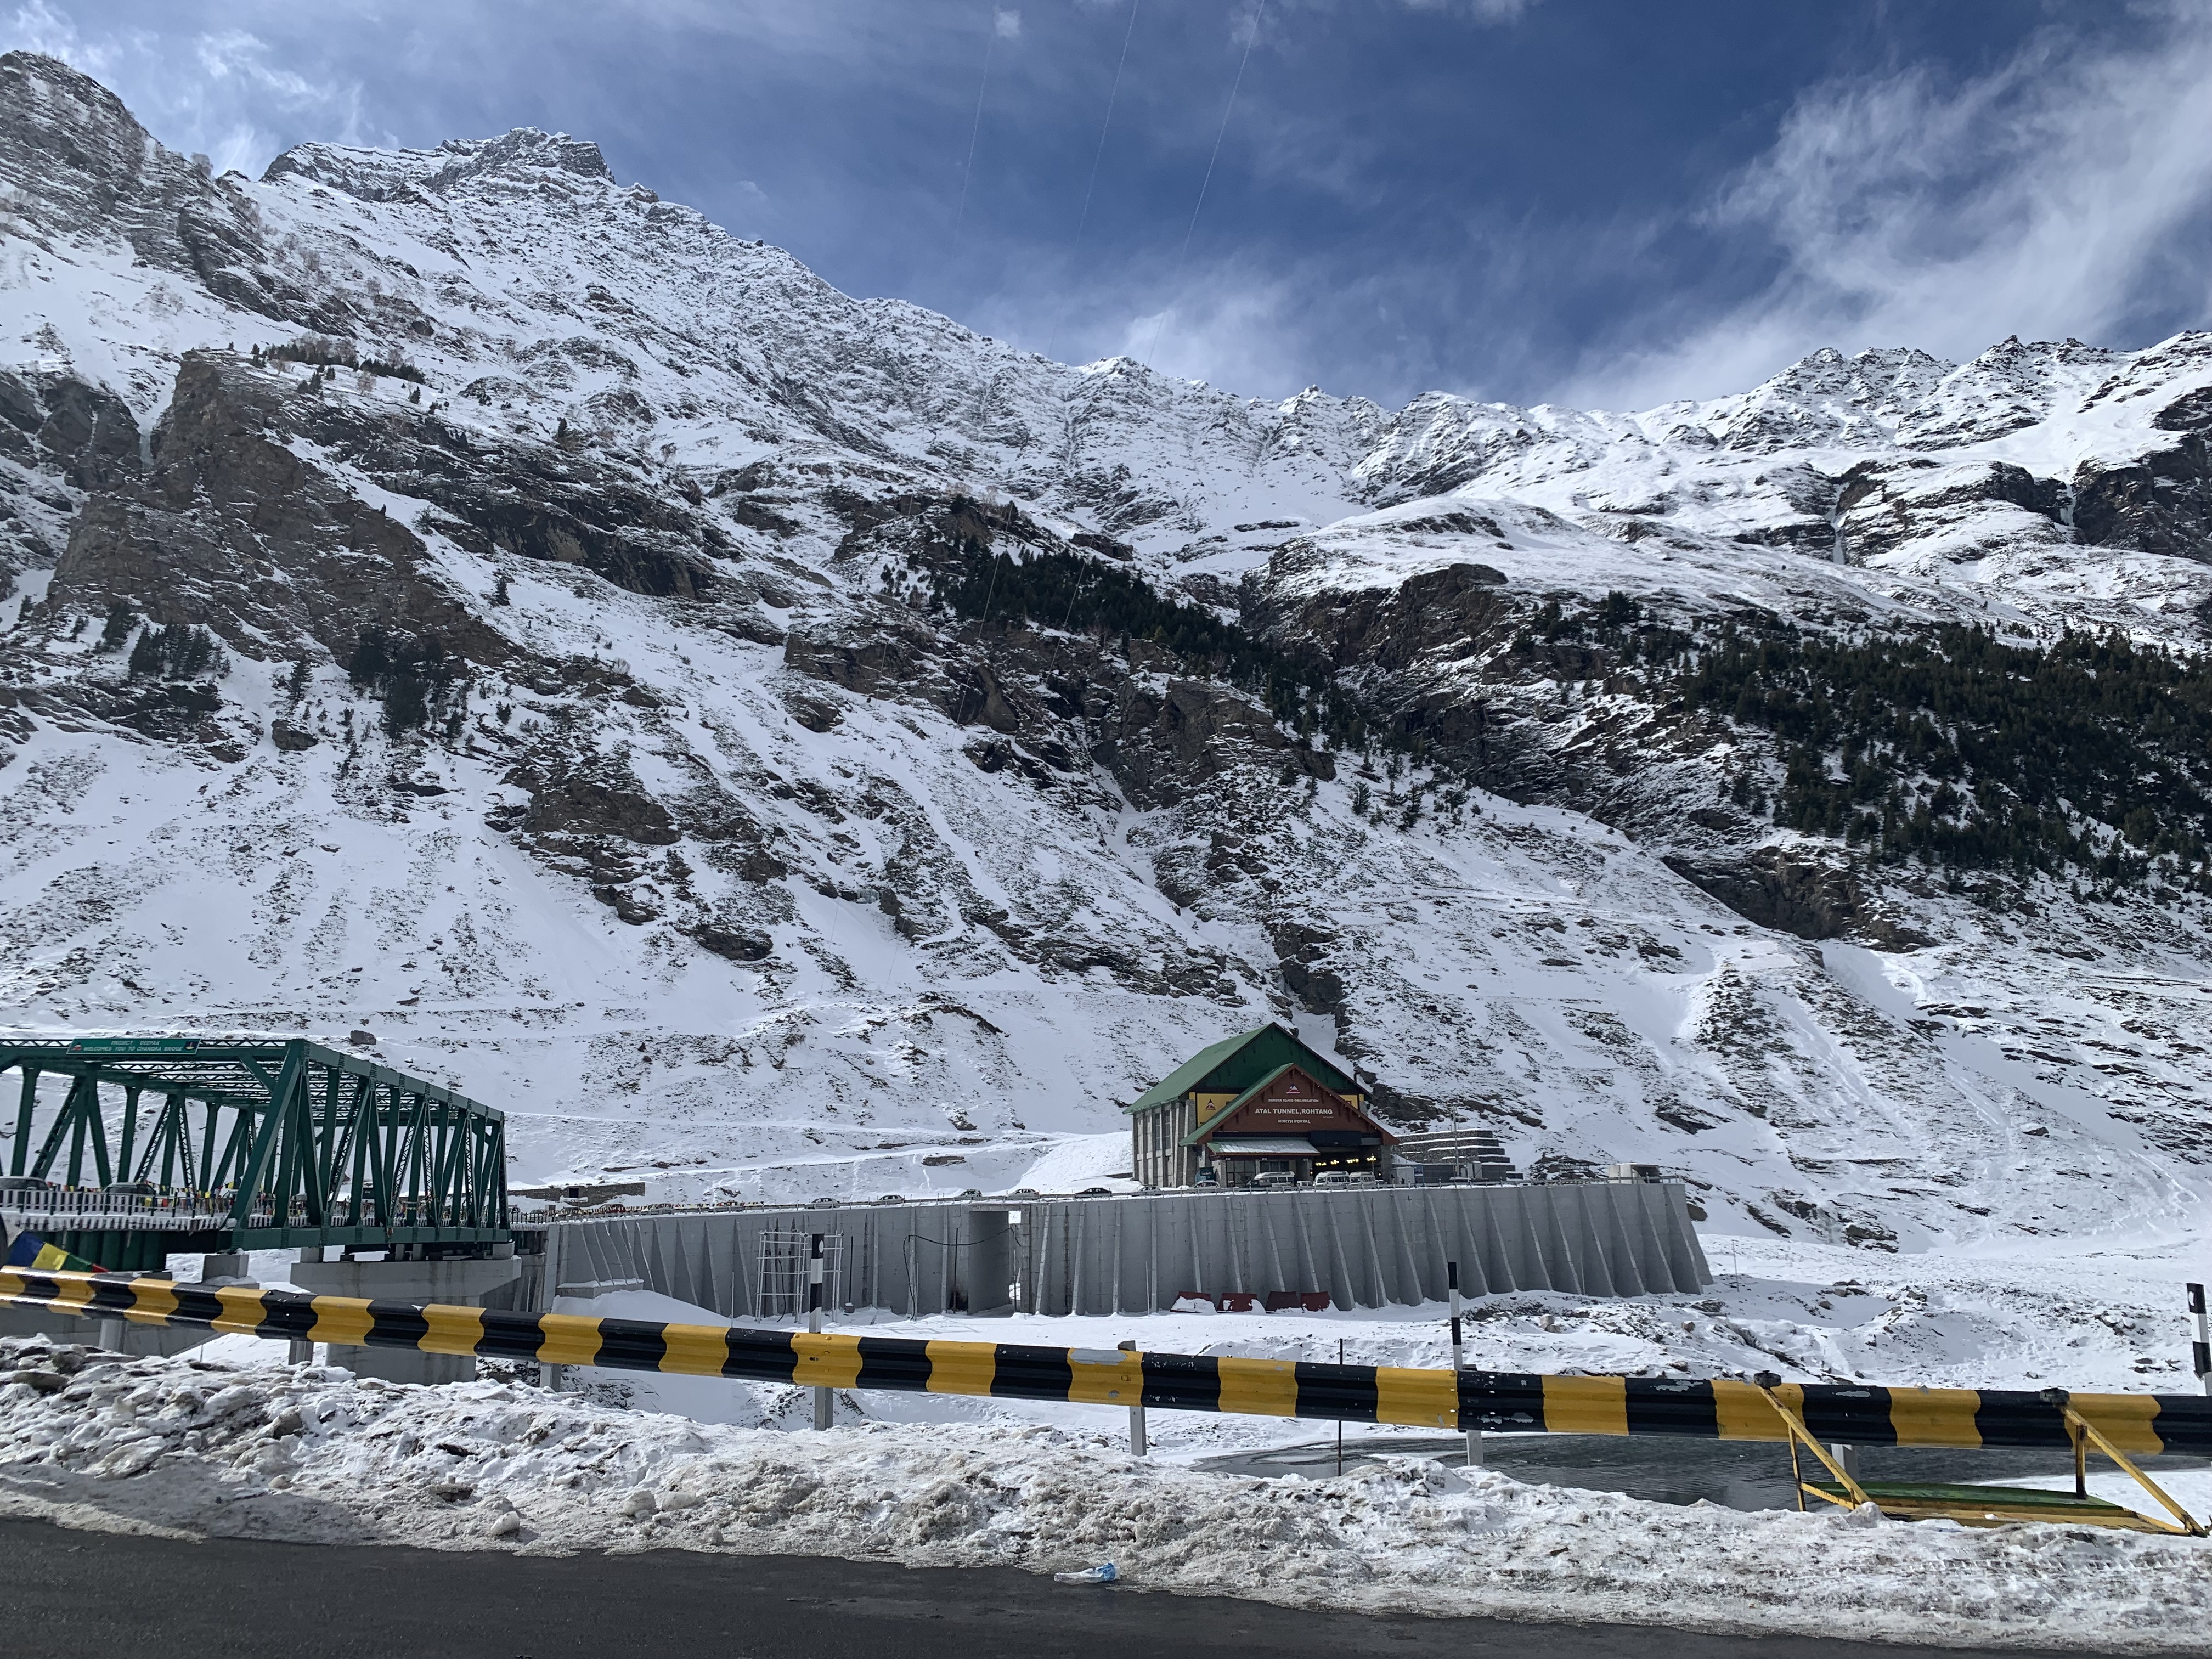 Here is how you can plan your trip to Shimla and Manali